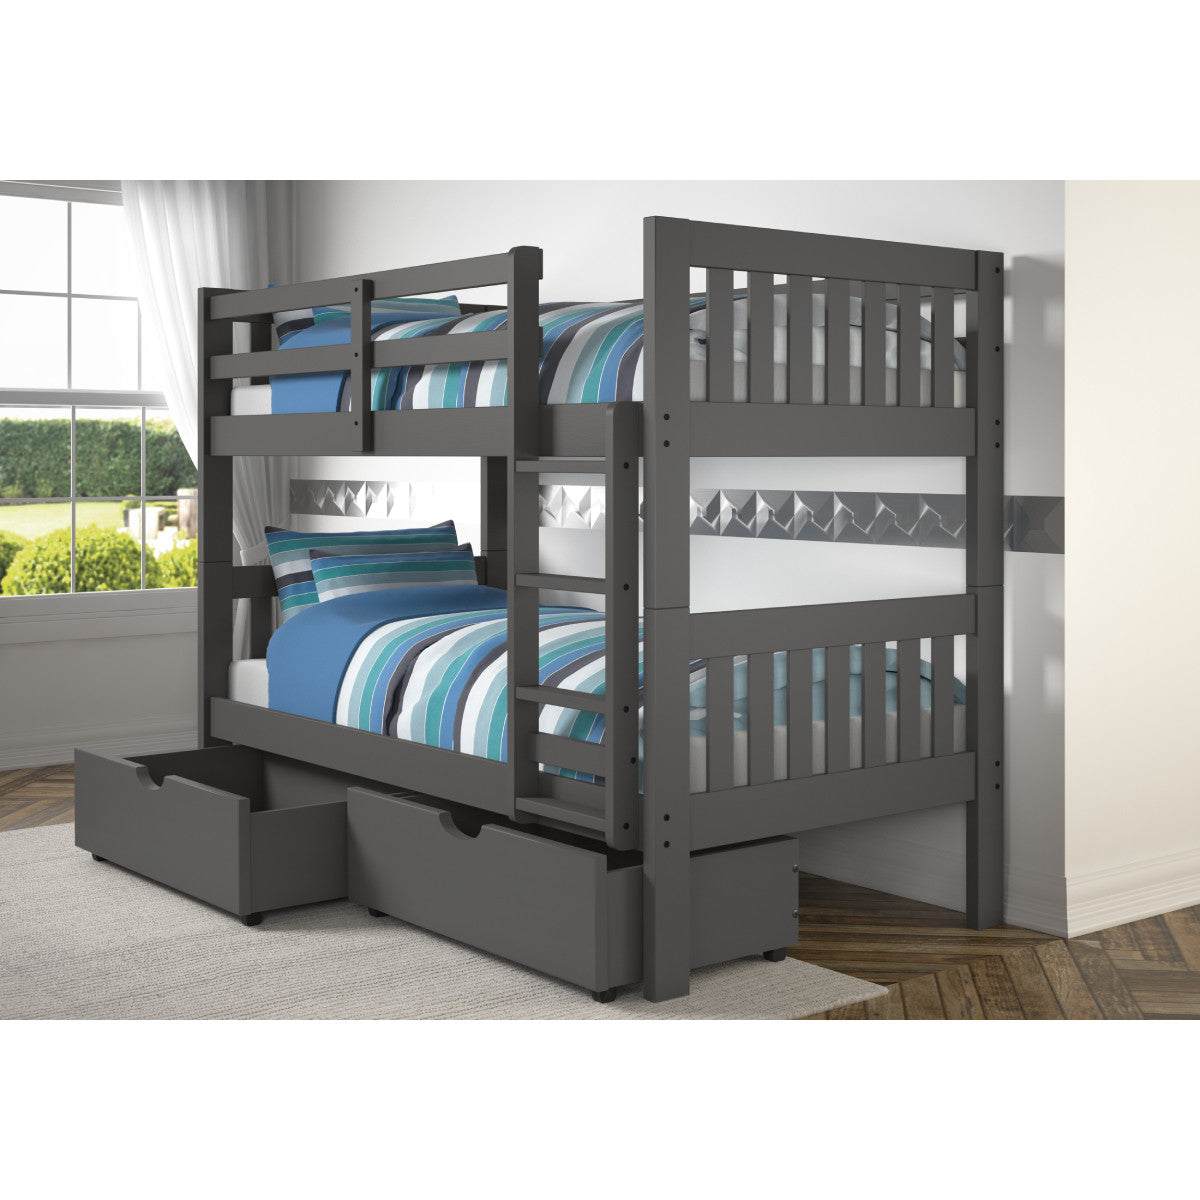 TWIN/TWIN MISSION BUNK BED W/DUAL UNDER BED DRAWERS IN DARK GREY FINISH